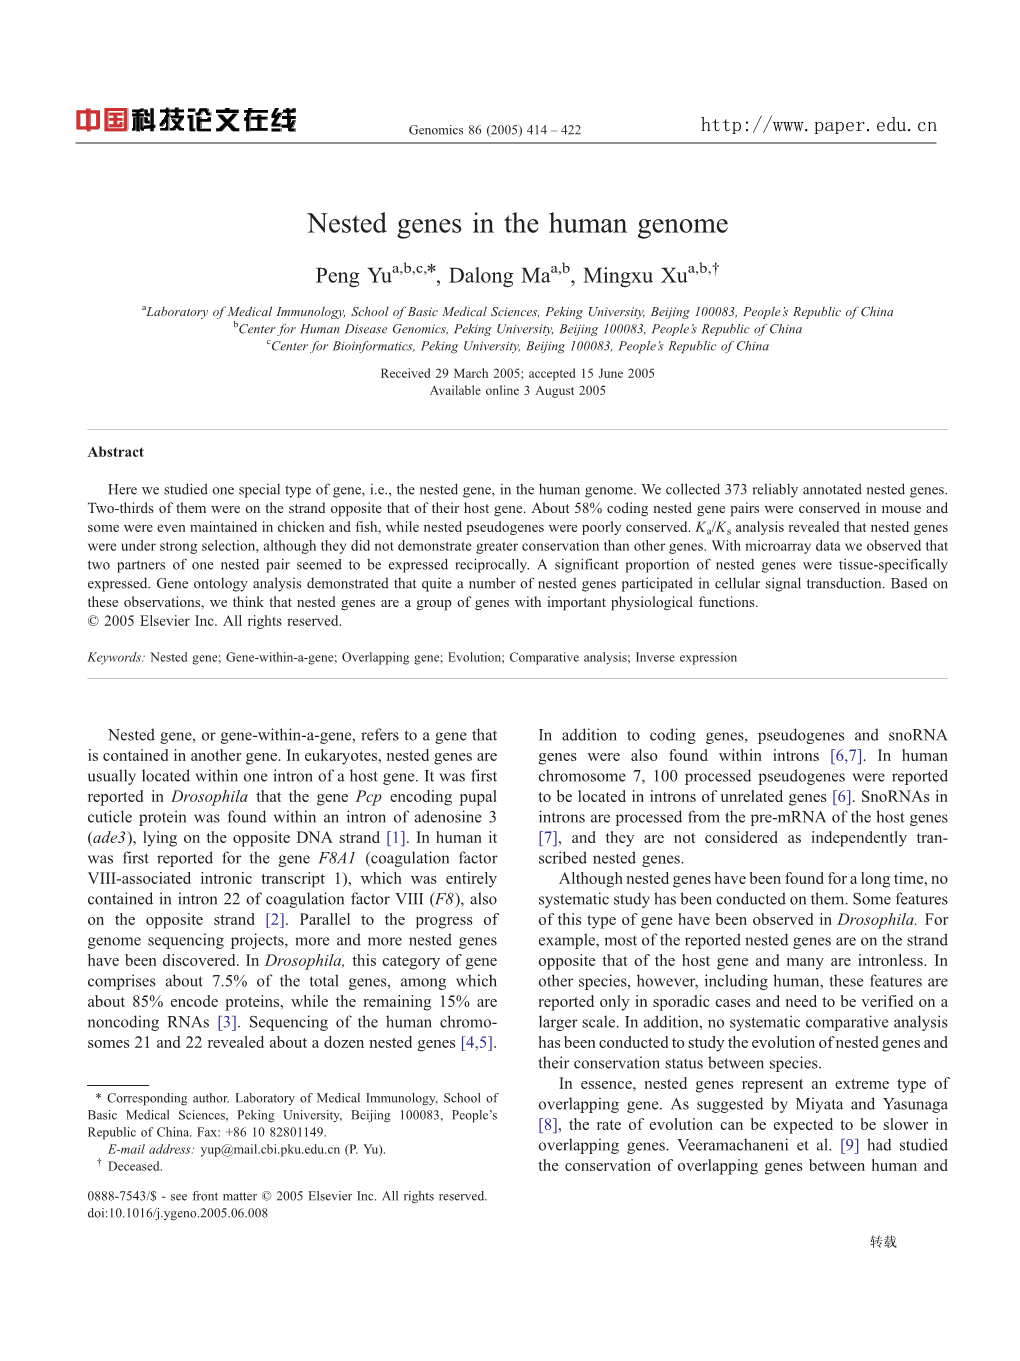 Nested Genes in the Human Genome